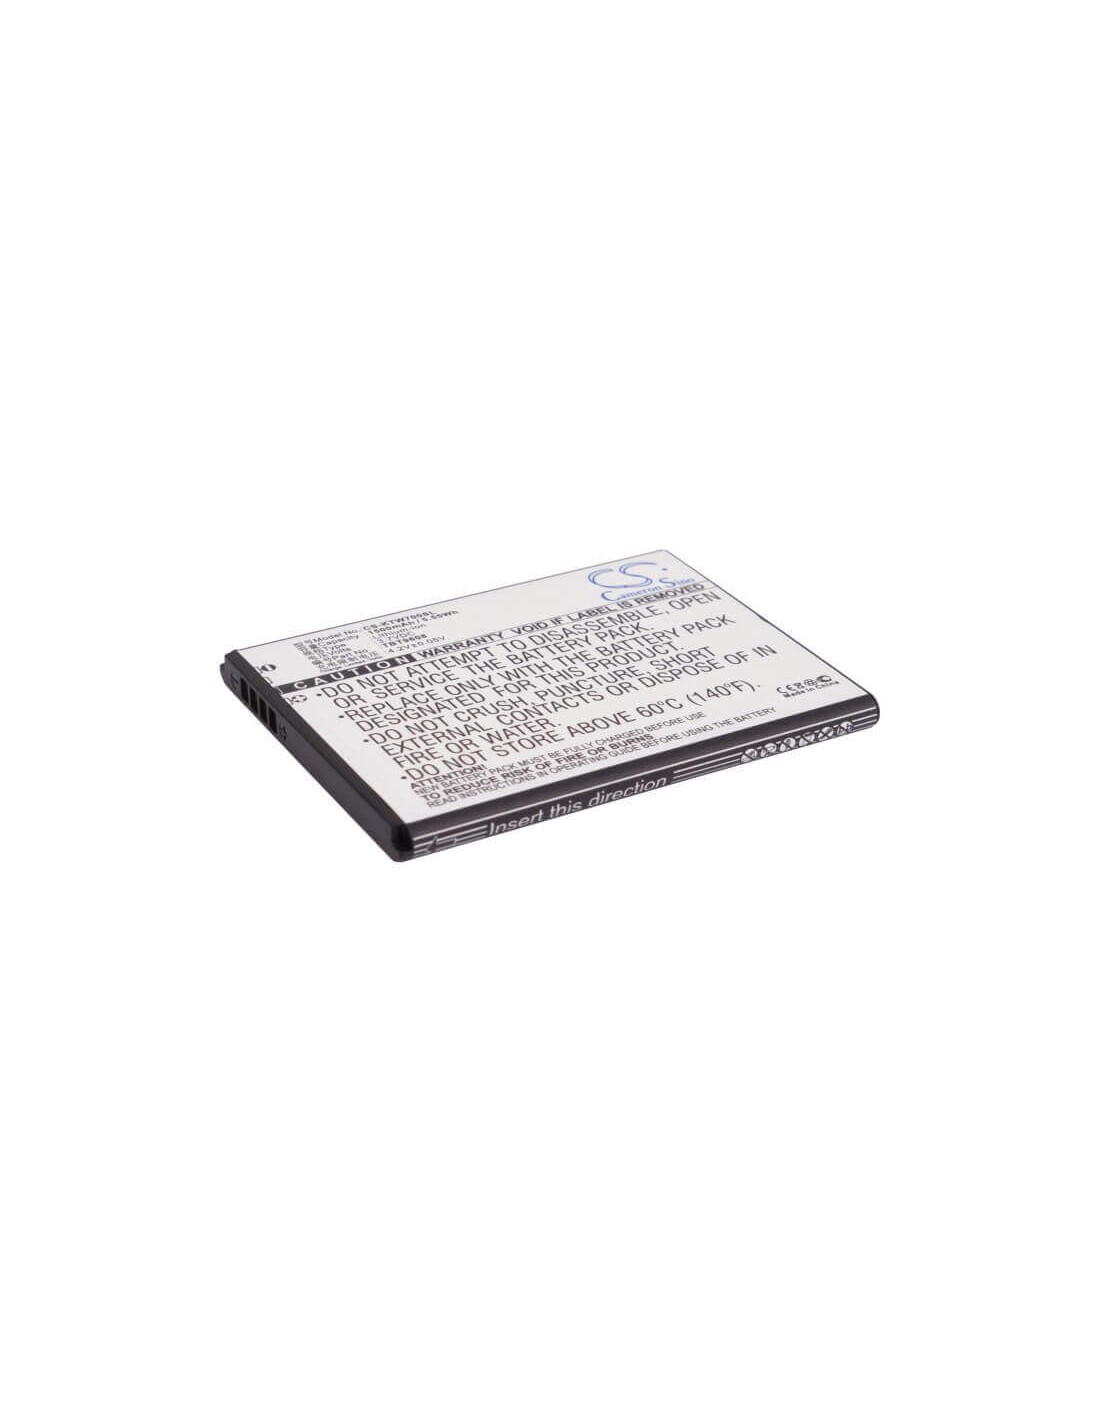 Battery for K-Touch W70, W70+, T87 3.7V, 1500mAh - 5.55Wh